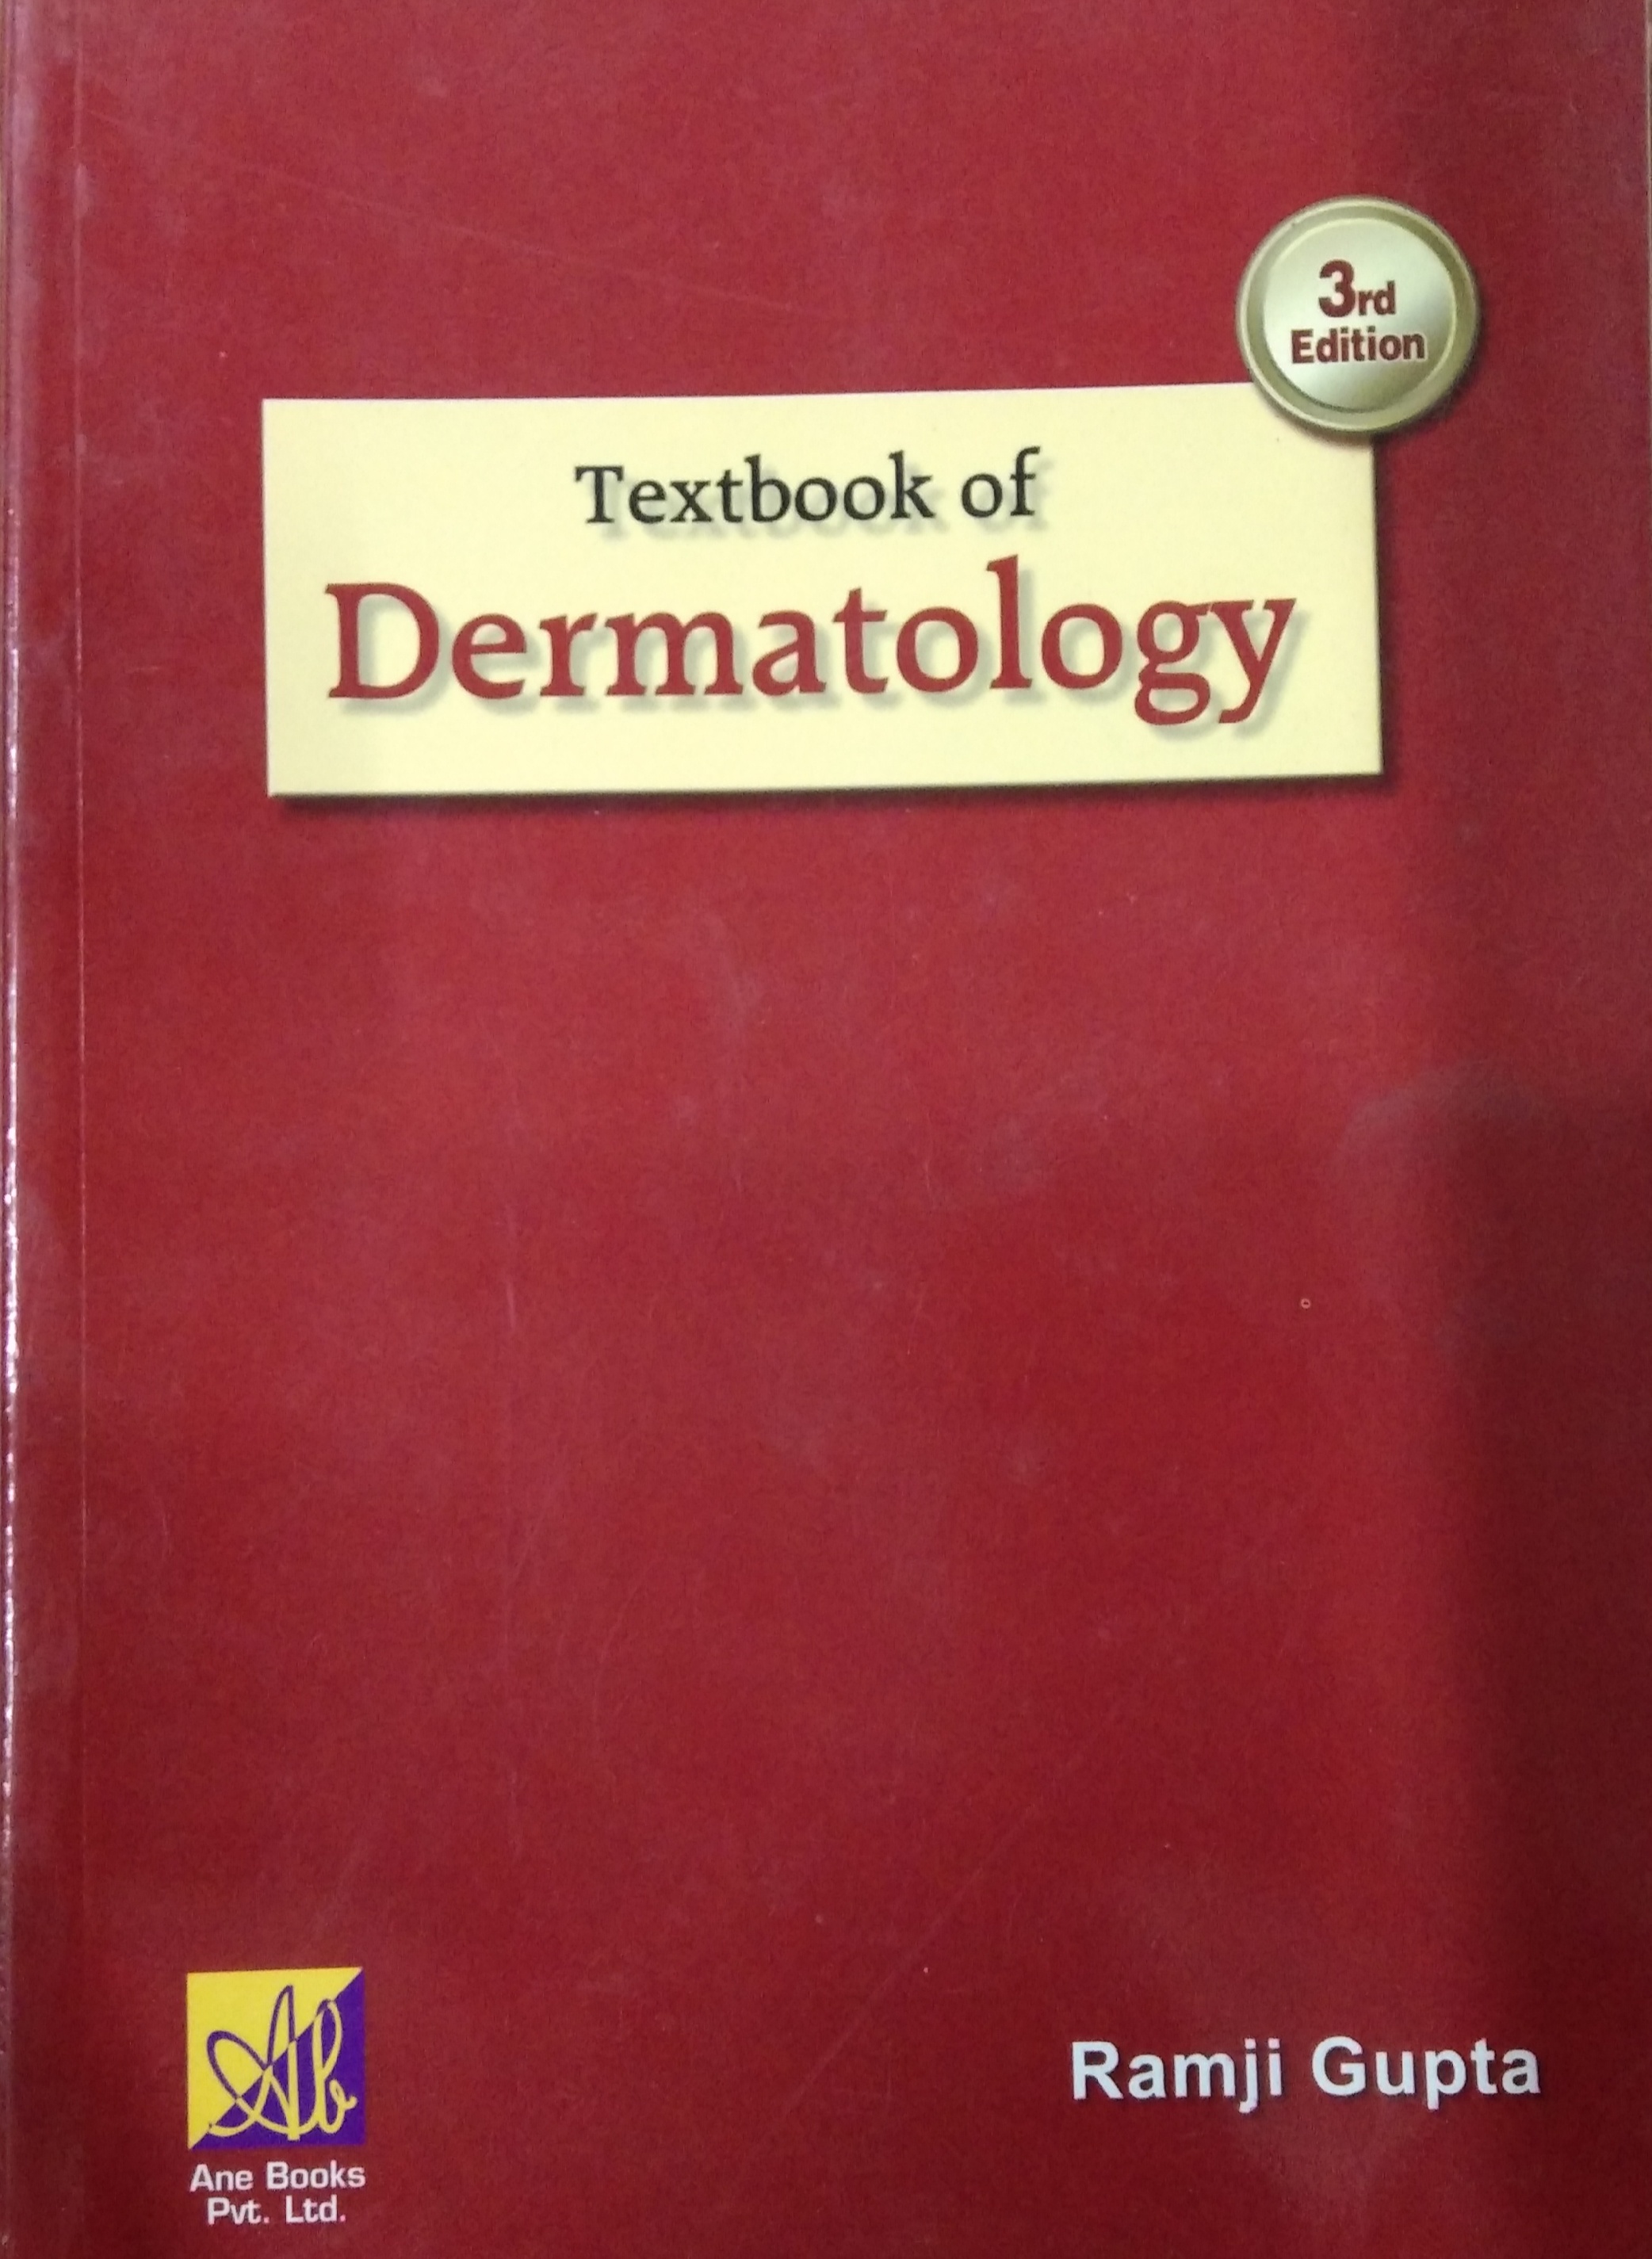 

clinical-sciences/dermatology/textbook-of-dermatology-3ed--9789381162095